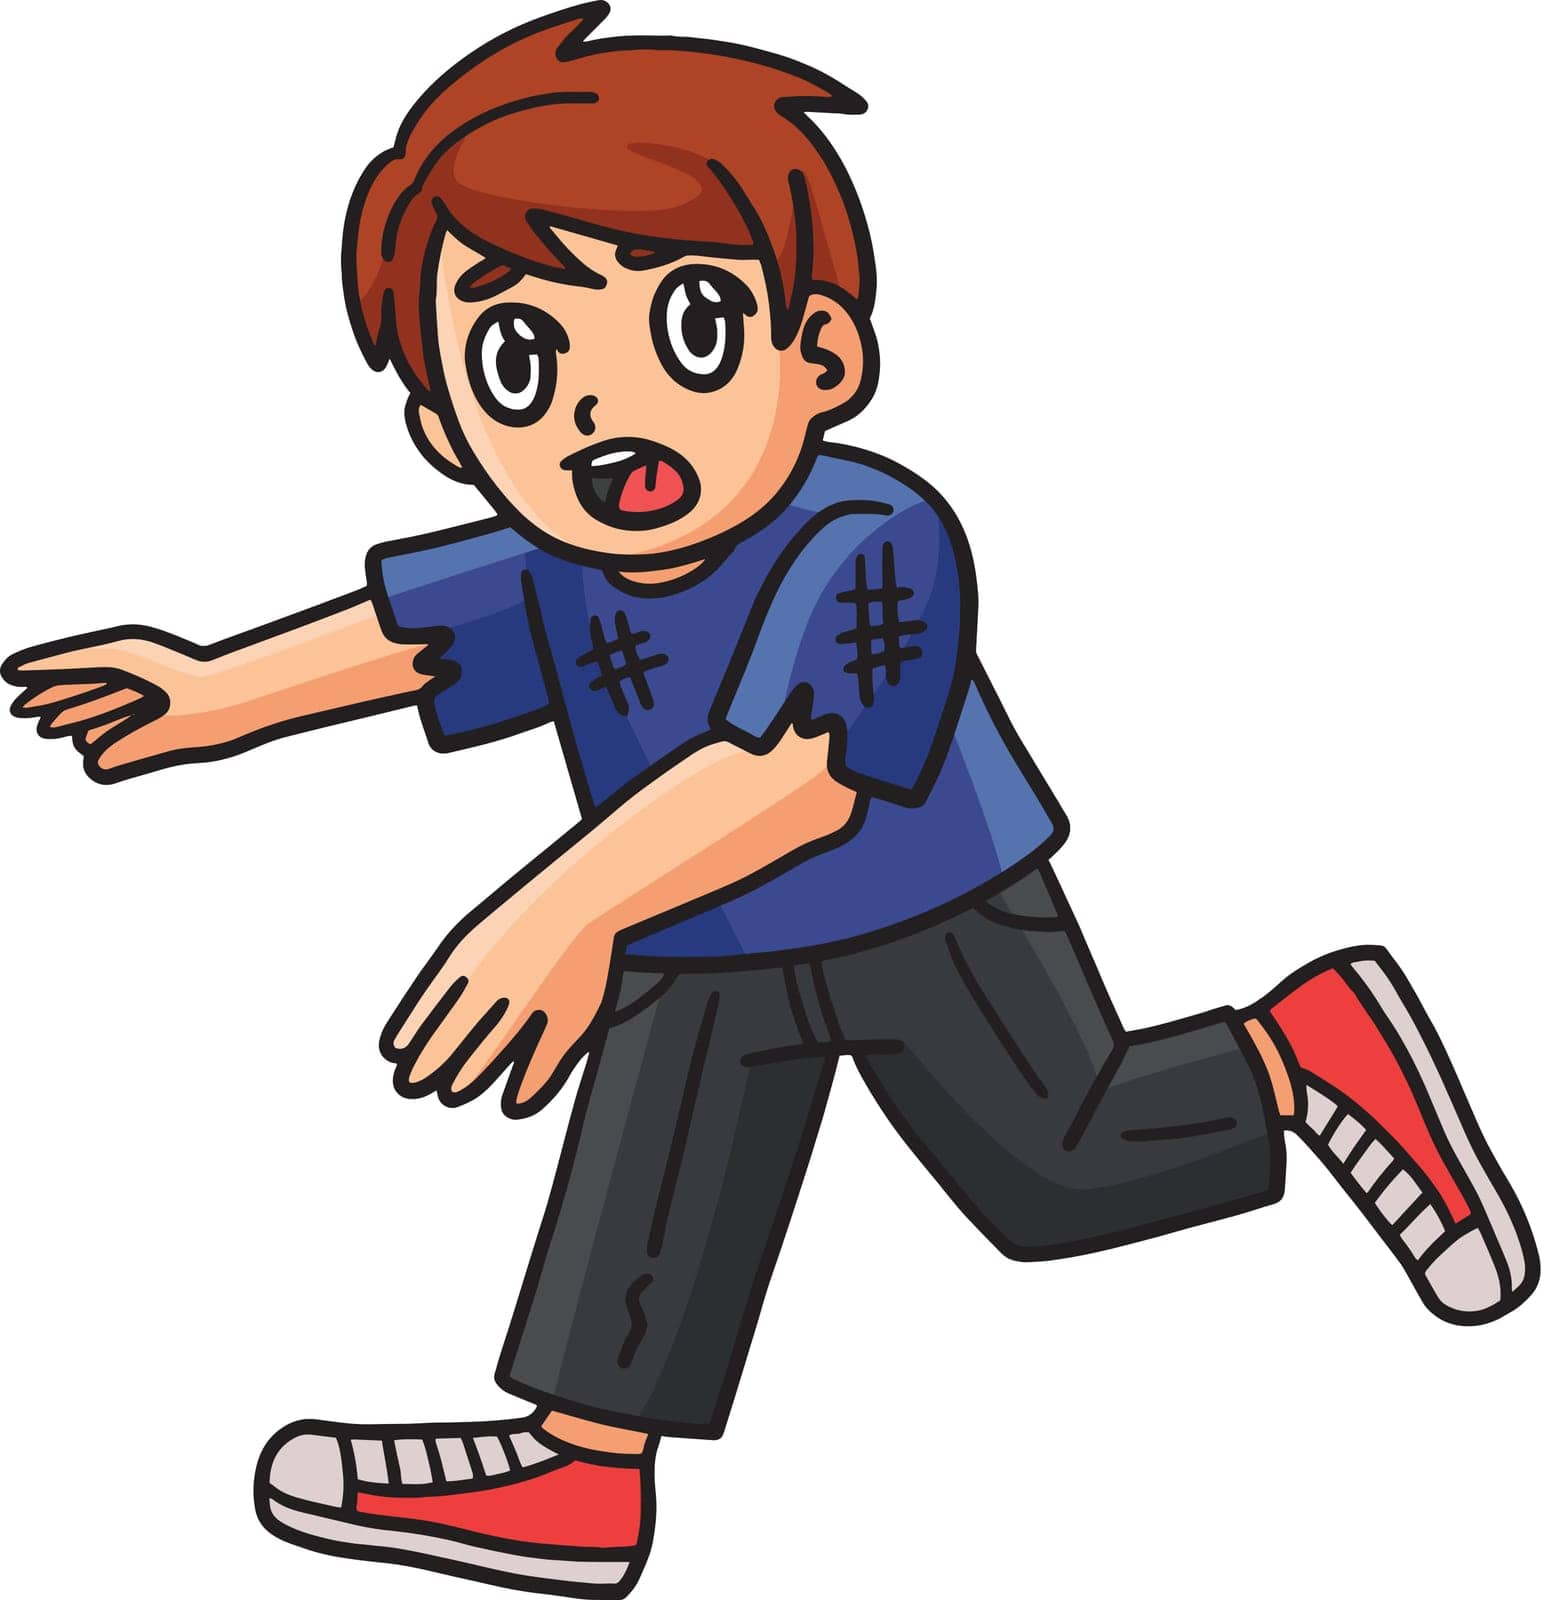 This cartoon clipart shows a Child Running illustration.